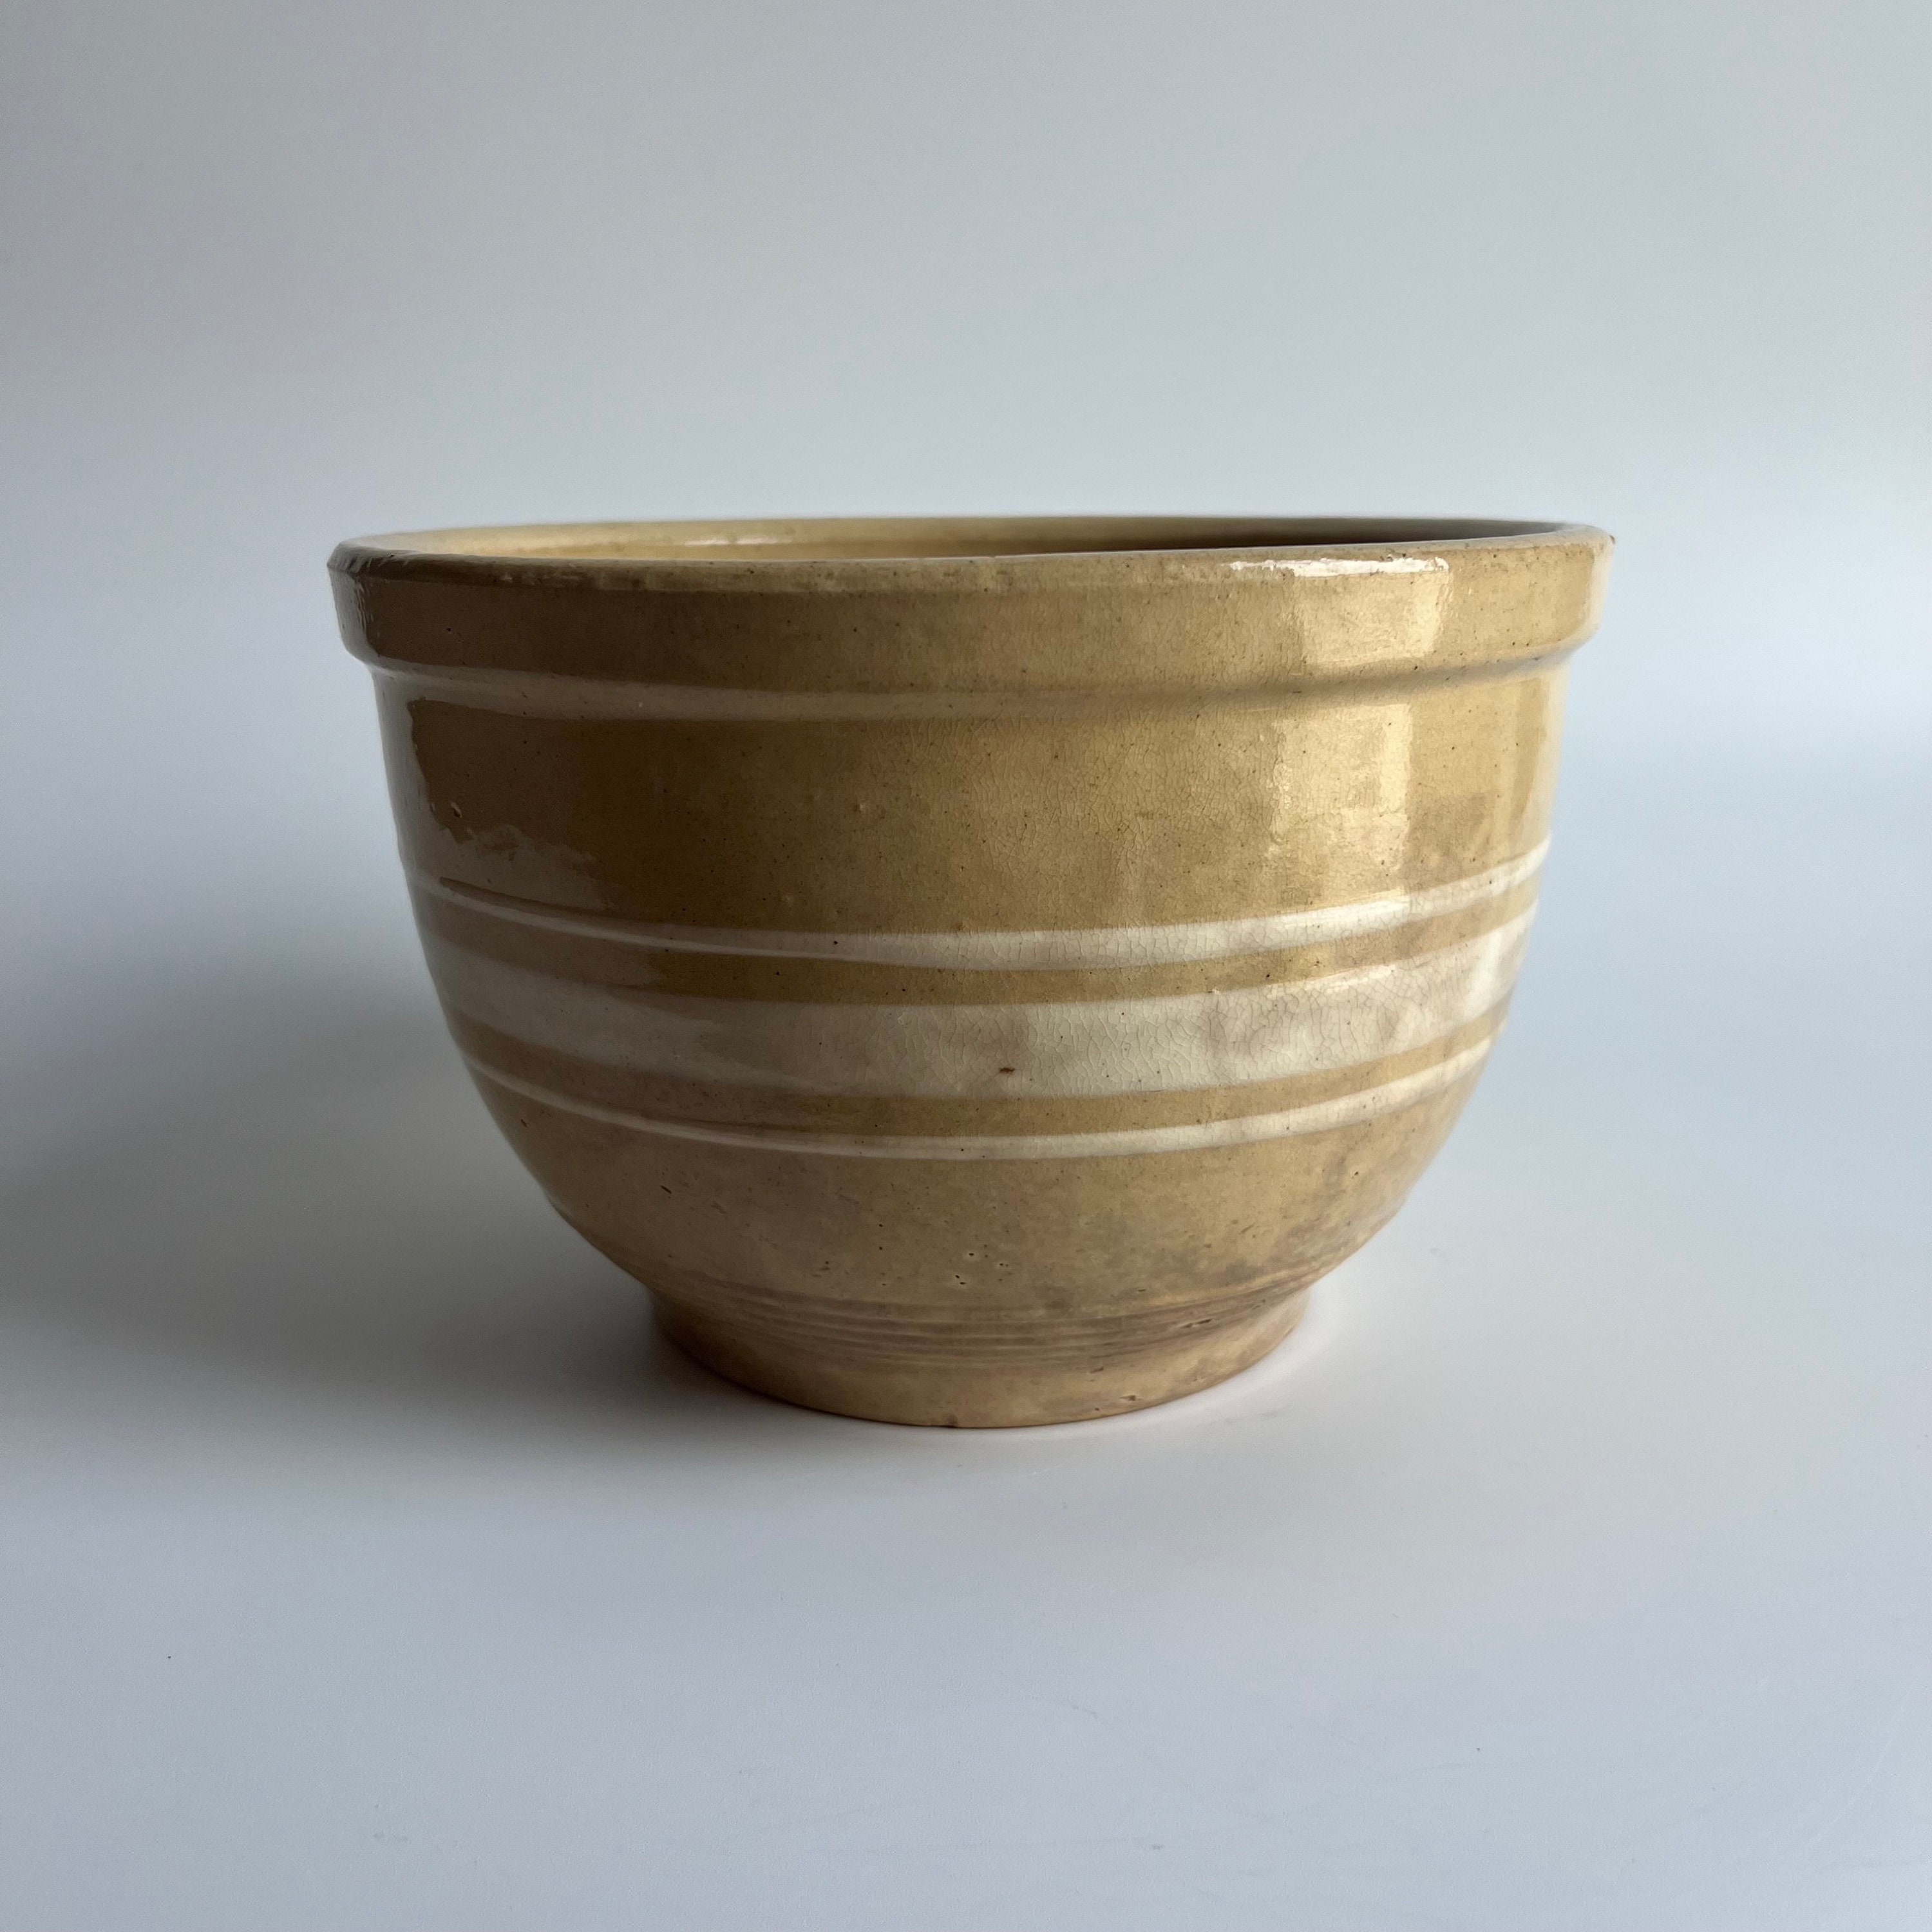 Watt 14 Extra Large Mixing Bowl Beige With Brown Stripes. It Measures 14w X  7h 